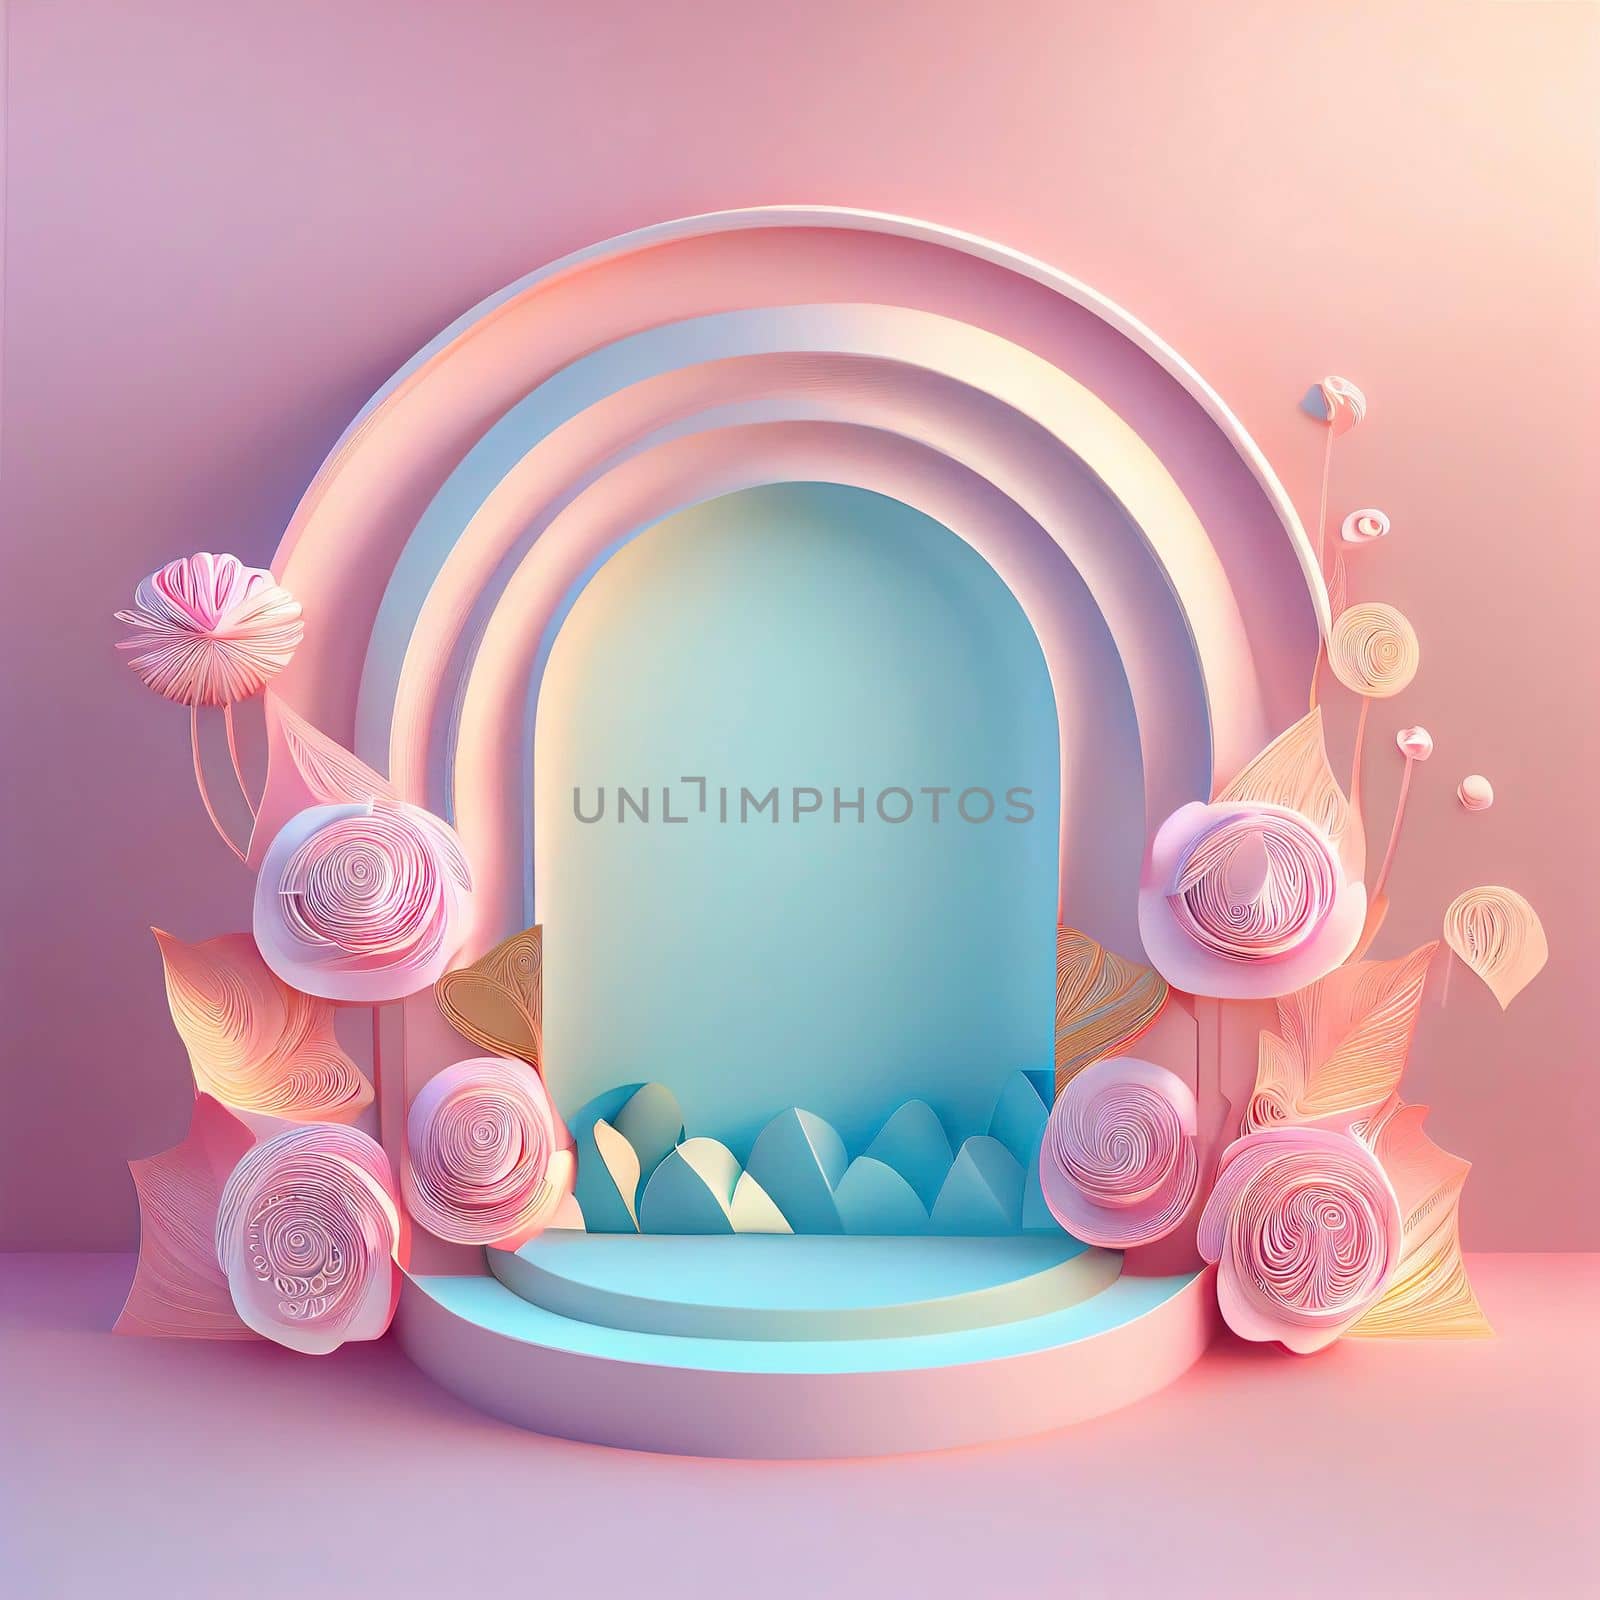 Feminine and elegant 3d podium illustration with abstract flower ornament for product display by templator